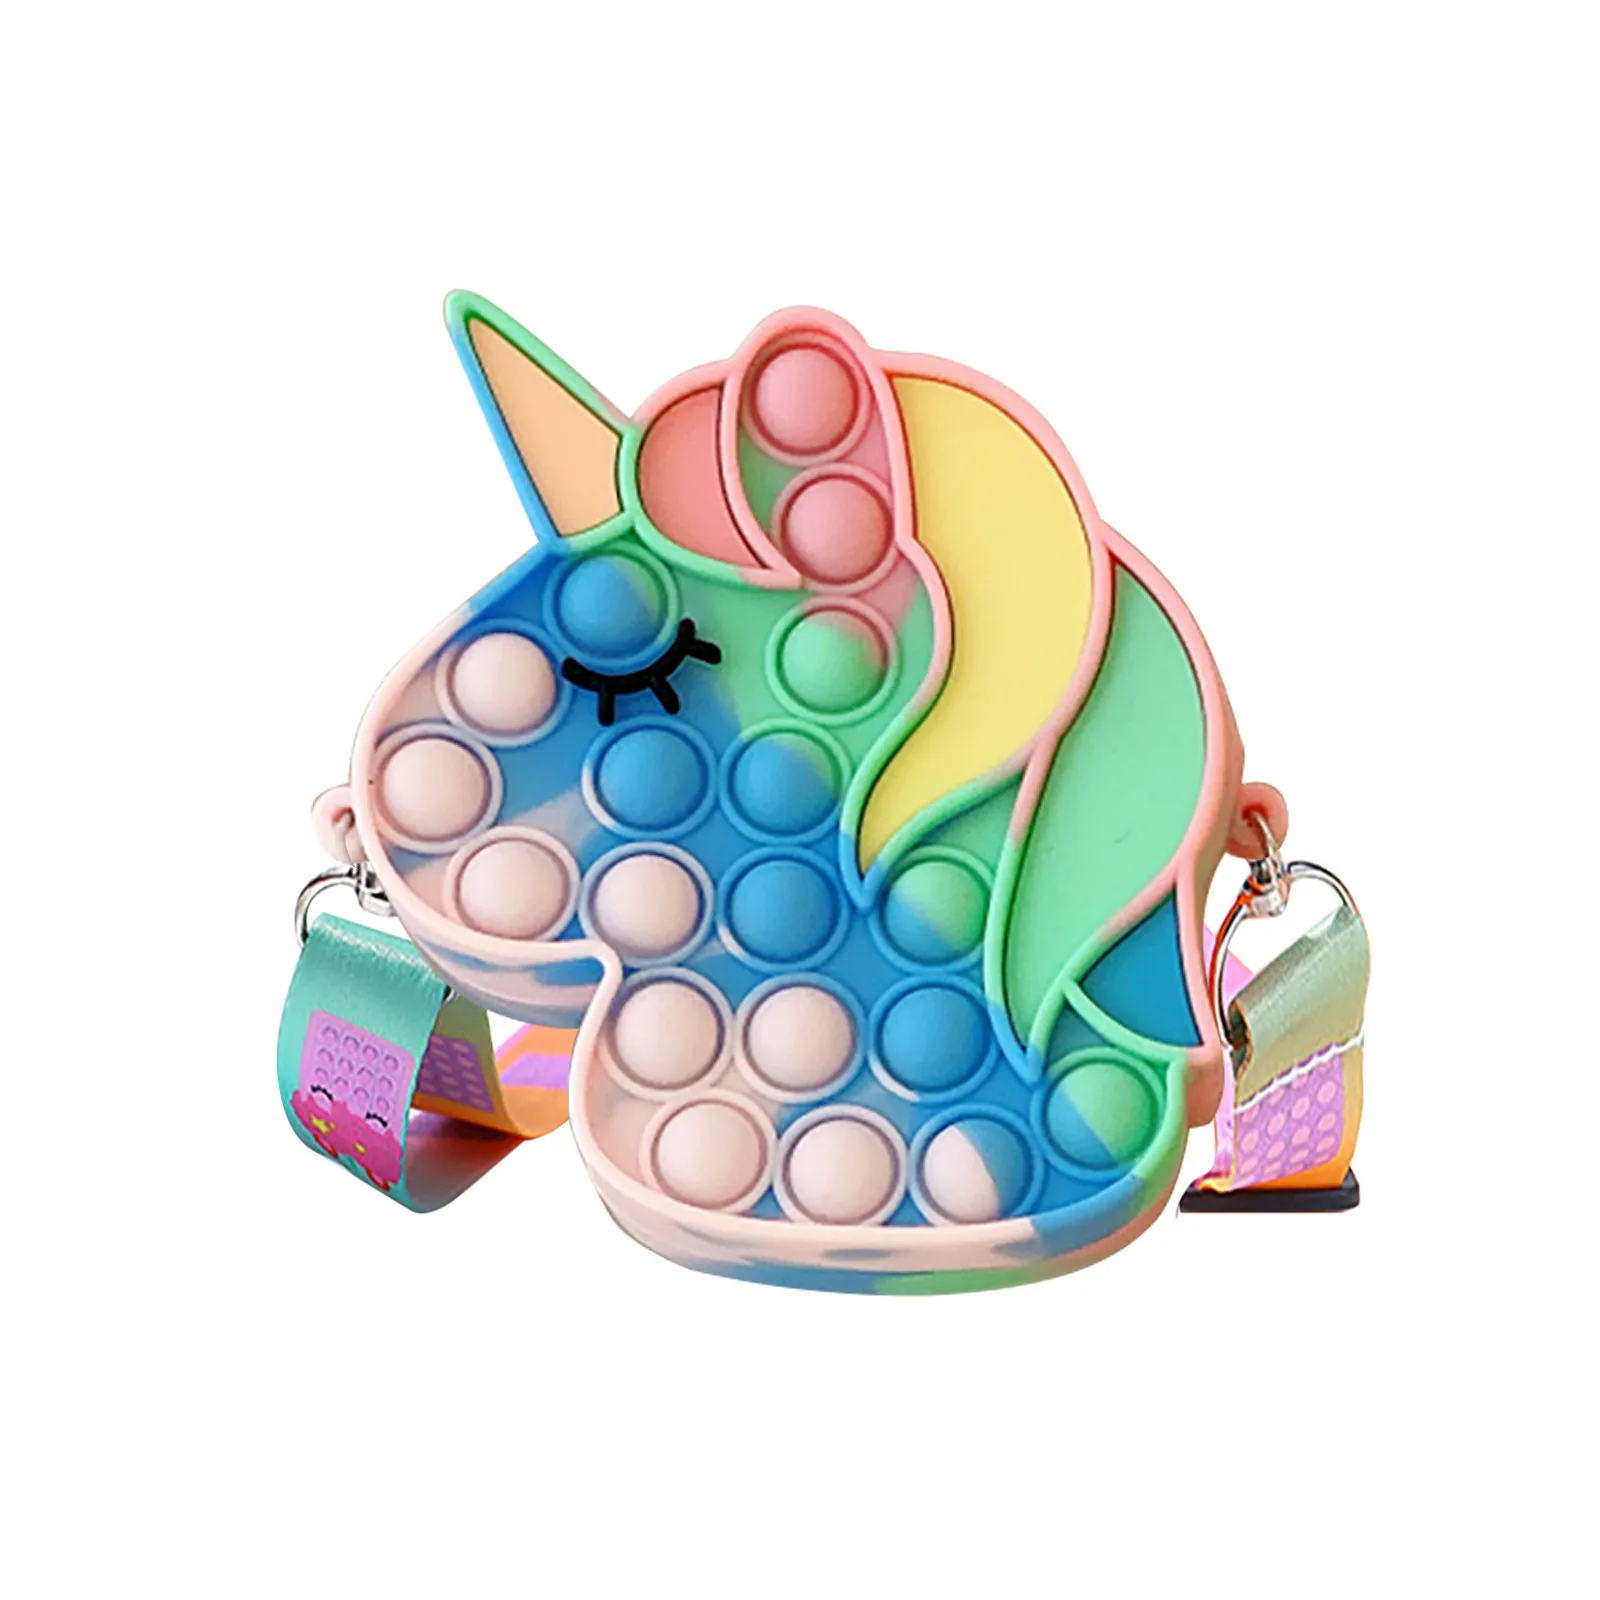 stress squeeze toy Rainbow Poppet Push Bubbles Toy Unicorn Kawaii Coin Purse Children Wallet Ladies Bag Silica Gel Simple Dimple Fidget Toy dna stress ball